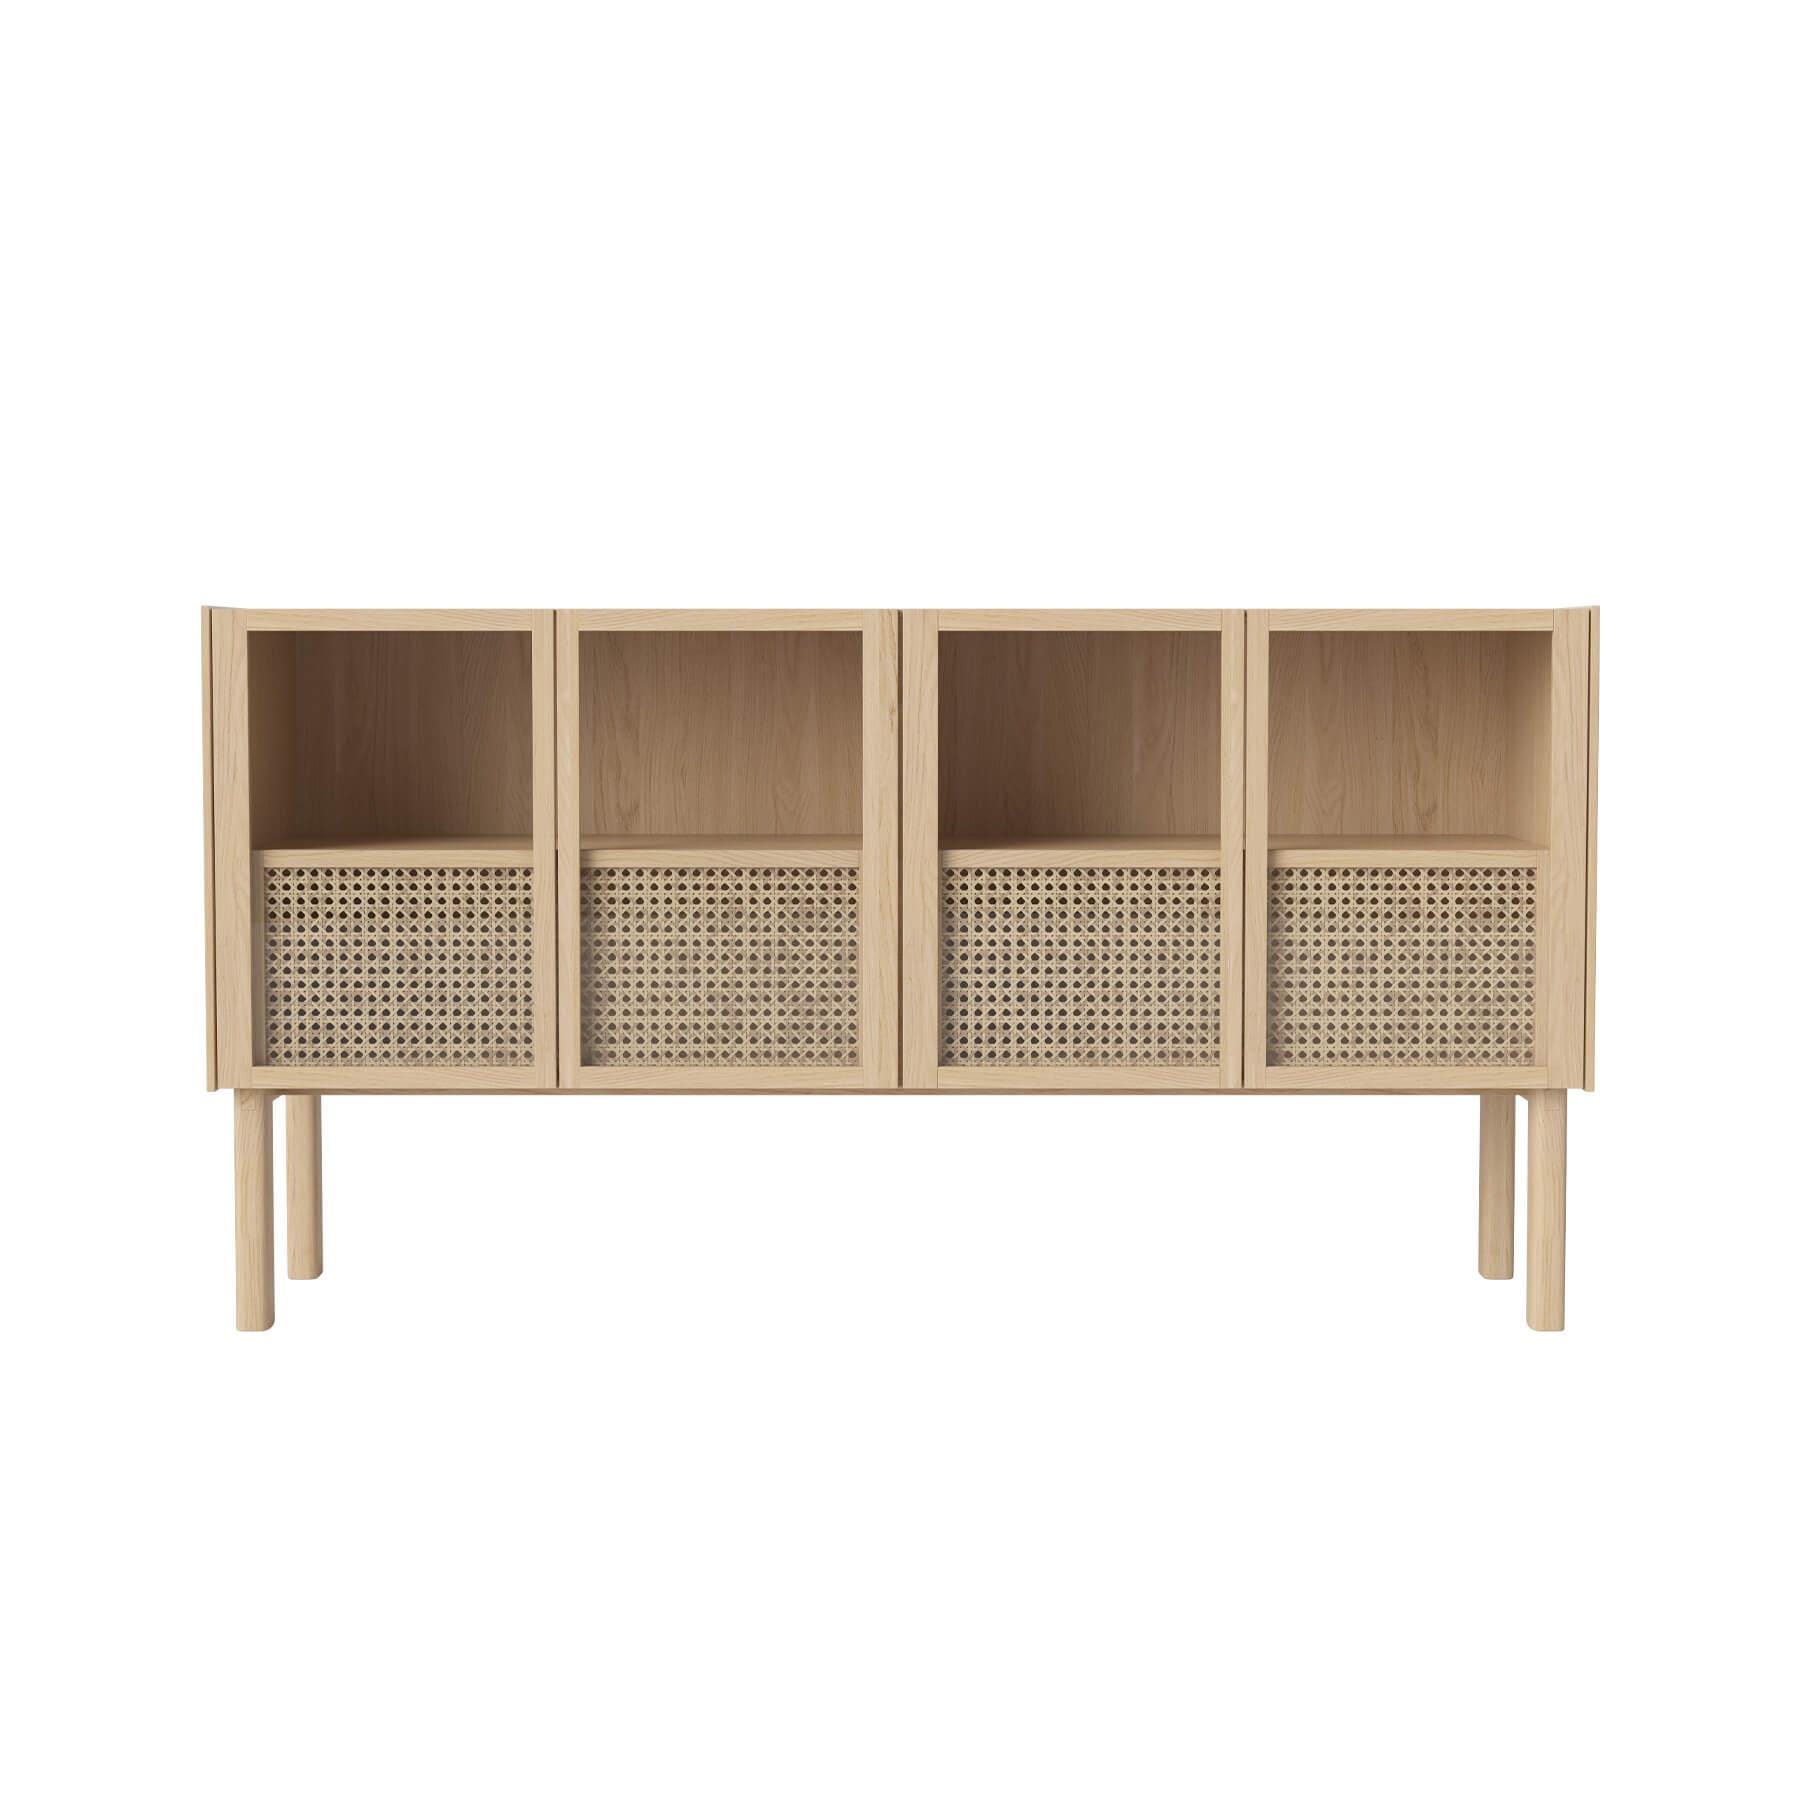 Bolia Cana Sideboard White Pigmented Oak Light Wood Designer Furniture From Holloways Of Ludlow